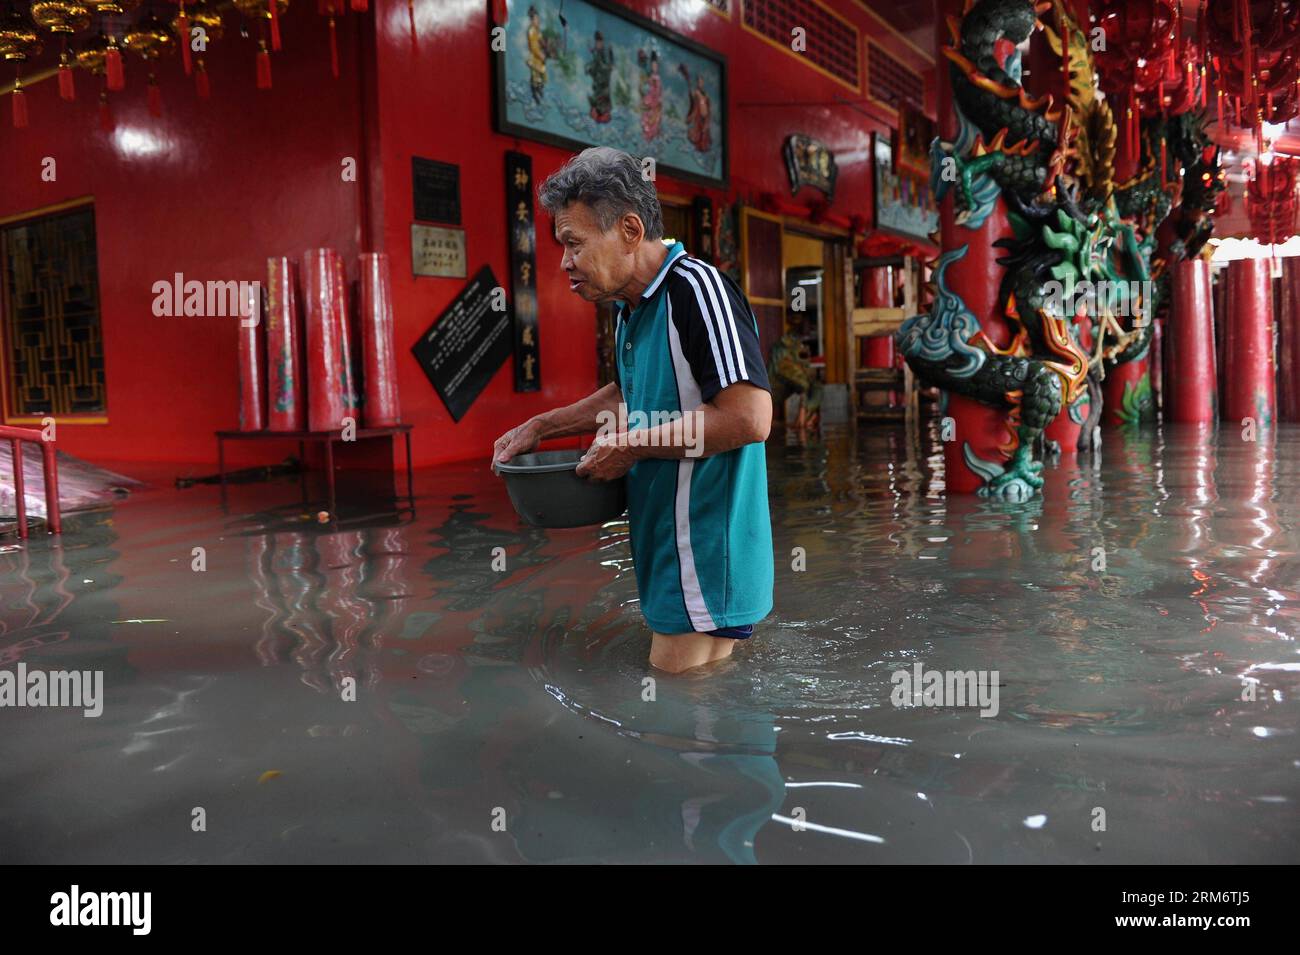 (140129) -- JAKARTA, Jan. 29, 2014 (Xinhua) -- An Indonesian man wades through floodwater in Jakarta, Indonesia, Jan 29. 2014. Floods, landslides and whirlwinds that hit many parts of Indonesia have claimed more than 100 lives so far this month, an official said here on Tuesday. (Xinhua/Zulkarnain) (jl) INDONESIA-JAKARTA-FLOOD PUBLICATIONxNOTxINxCHN   Jakarta Jan 29 2014 XINHUA to Indonesian Man Wade Through flood water in Jakarta Indonesia Jan 29 2014 floods  and  Thatcher Hit MANY Parts of Indonesia have claimed More than 100 Lives as Far This Month to Official Said Here ON Tuesday XINHUA  J Stock Photo